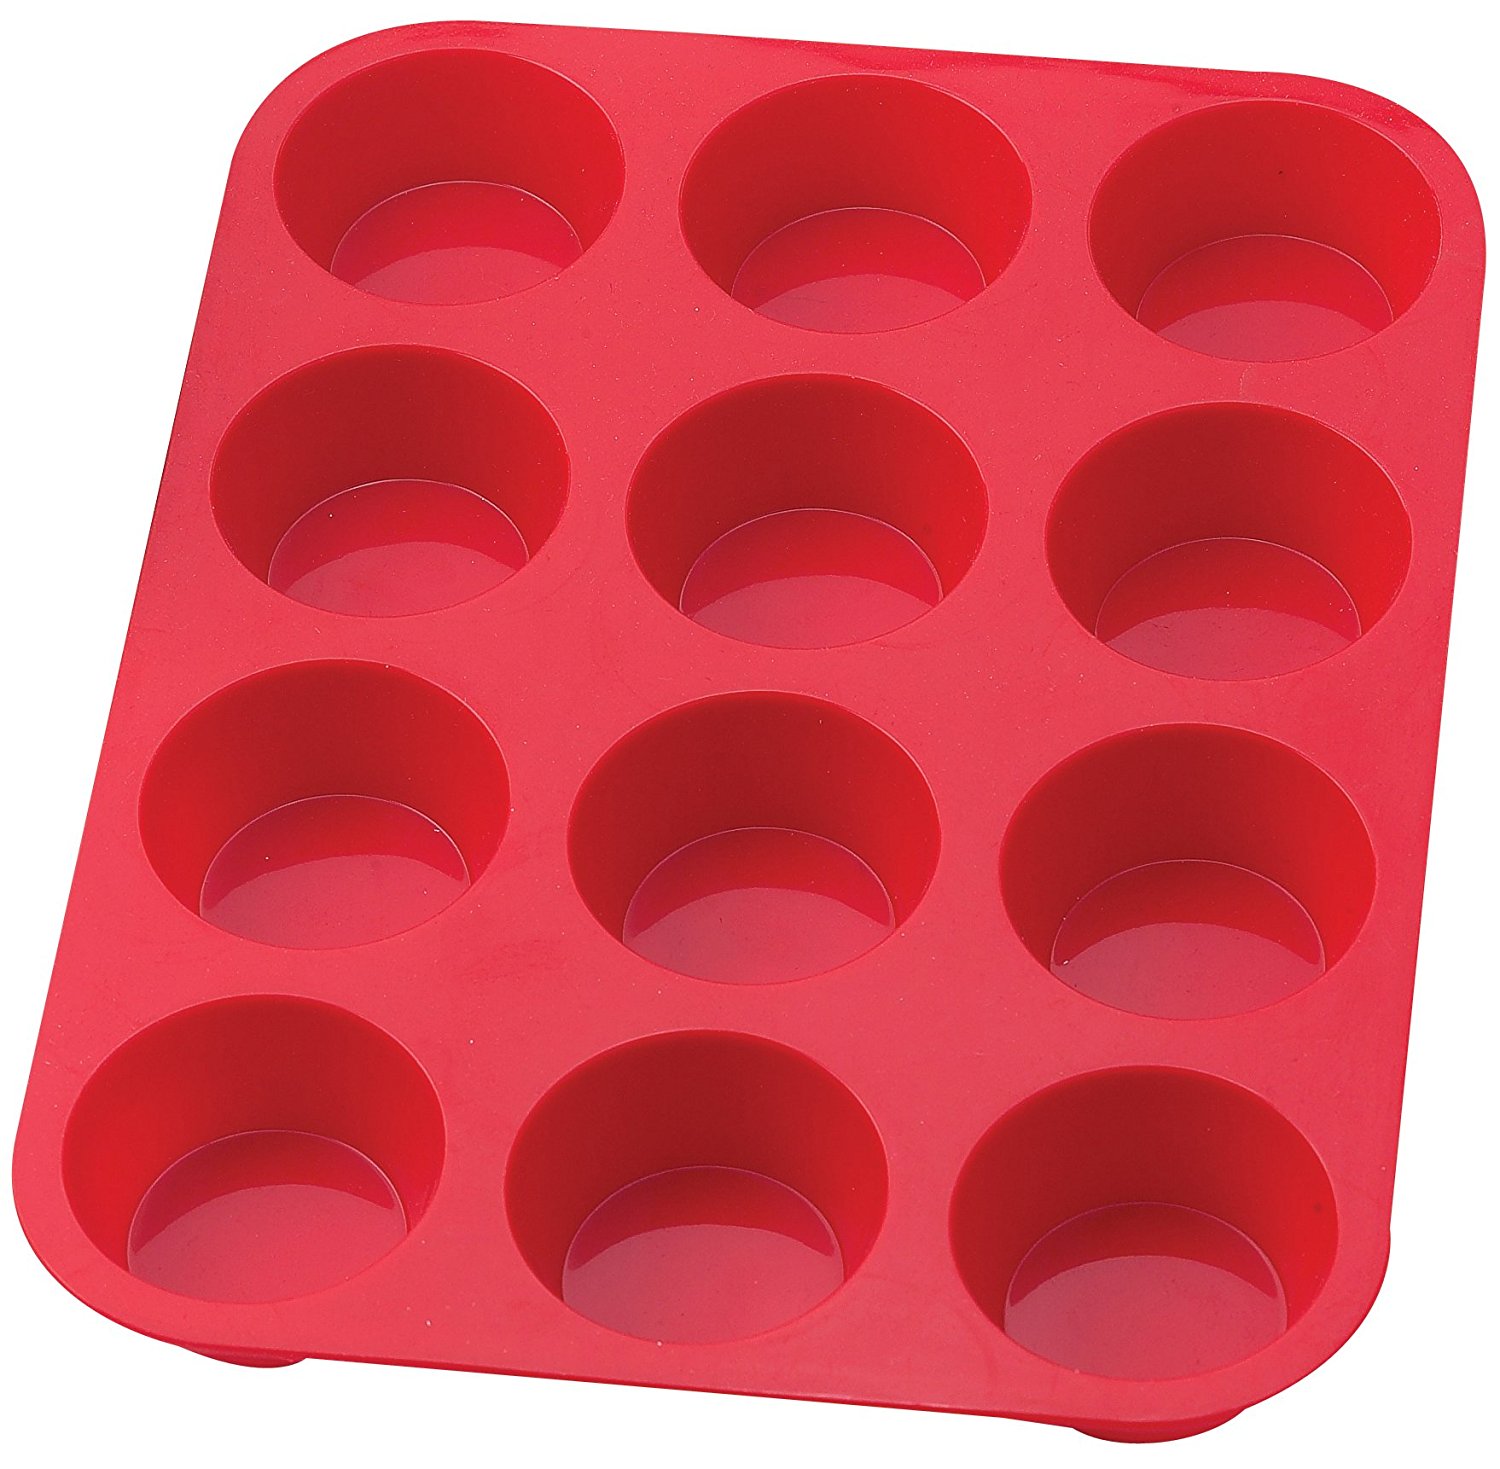 Amazon.com: Mrs. Anderson's Baking 43630 12-Cup Muffin Pan, Non ...